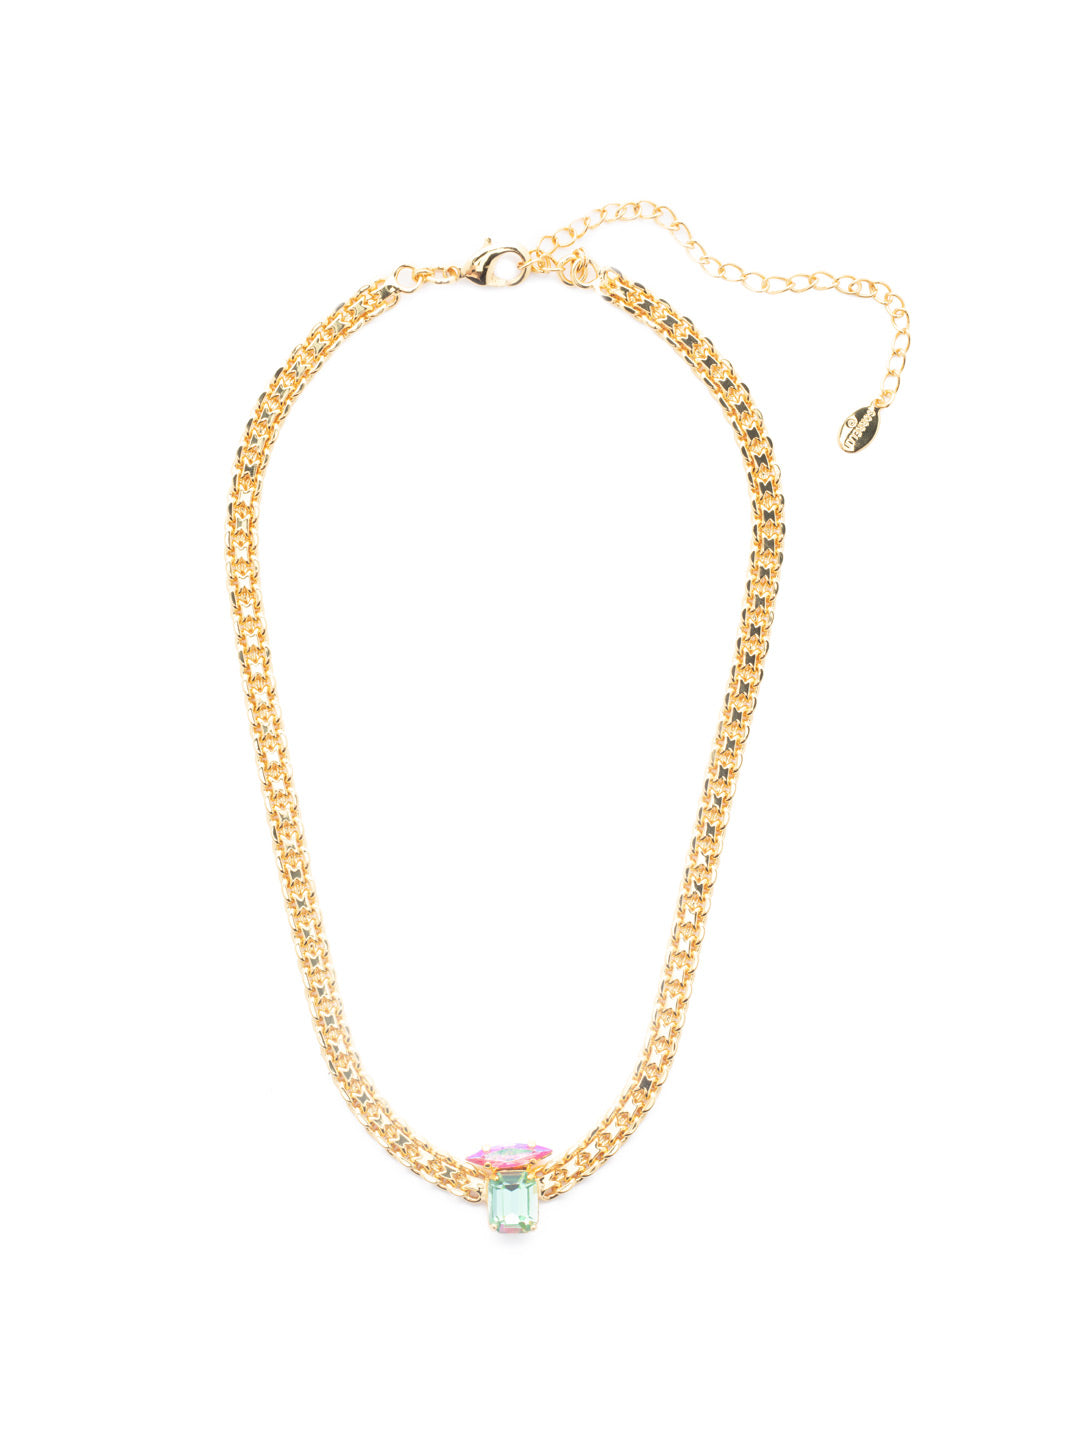 Graycen Tennis Necklace - NEP15BGSPR - <p>Metal rules in the Graycen Tennis Necklace. Layer on thick, dark standout links complemented by a cushion octagon and navette crystal sparkler. From Sorrelli's Spring Rain collection in our Bright Gold-tone finish.</p>